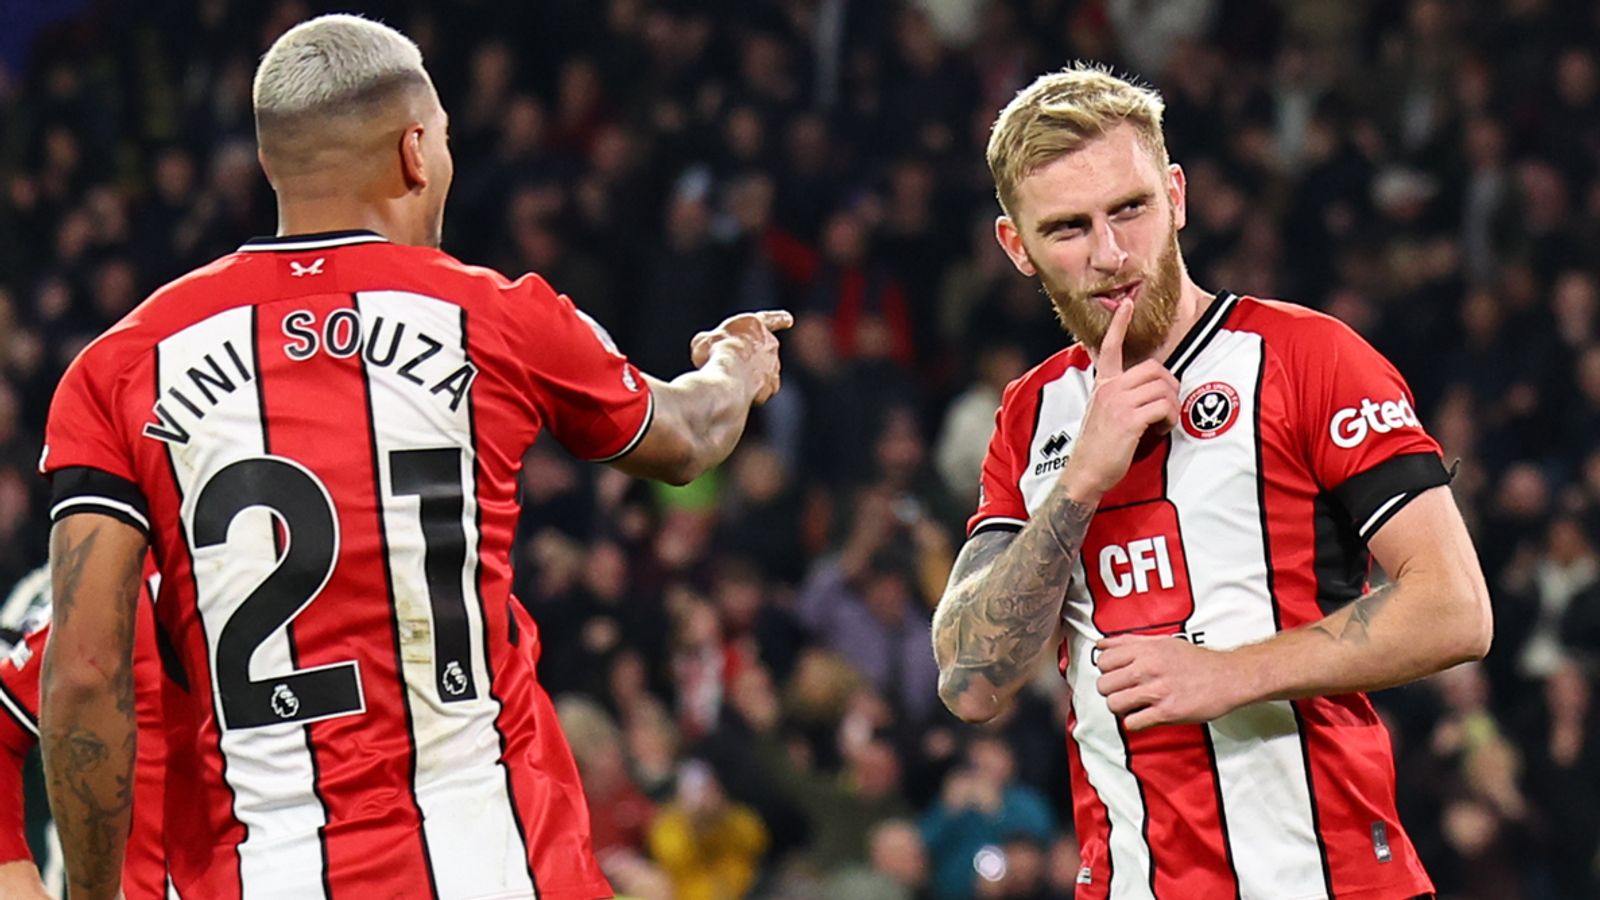 McBurnie on Blades' season and family battle away from field thumbnail